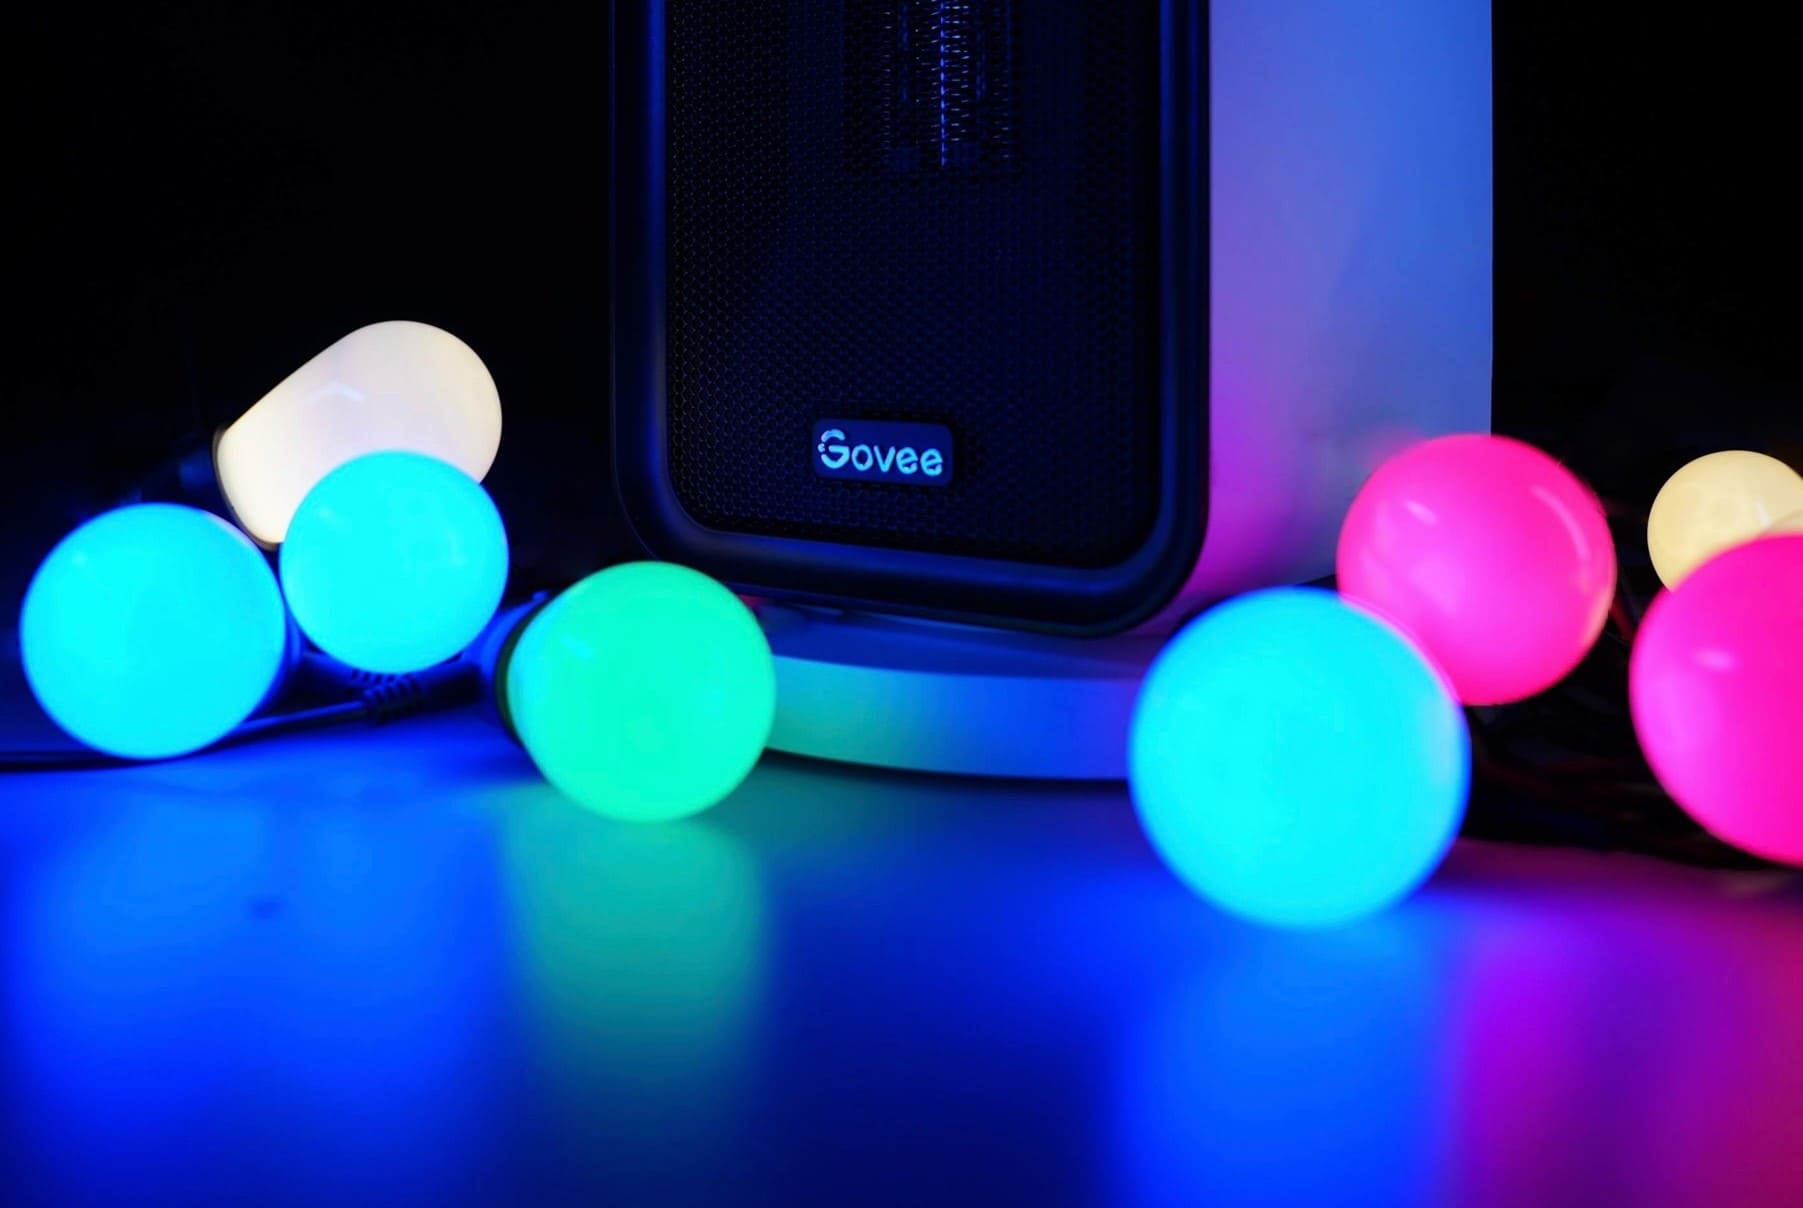 How To Link Govee Lights To Google Home